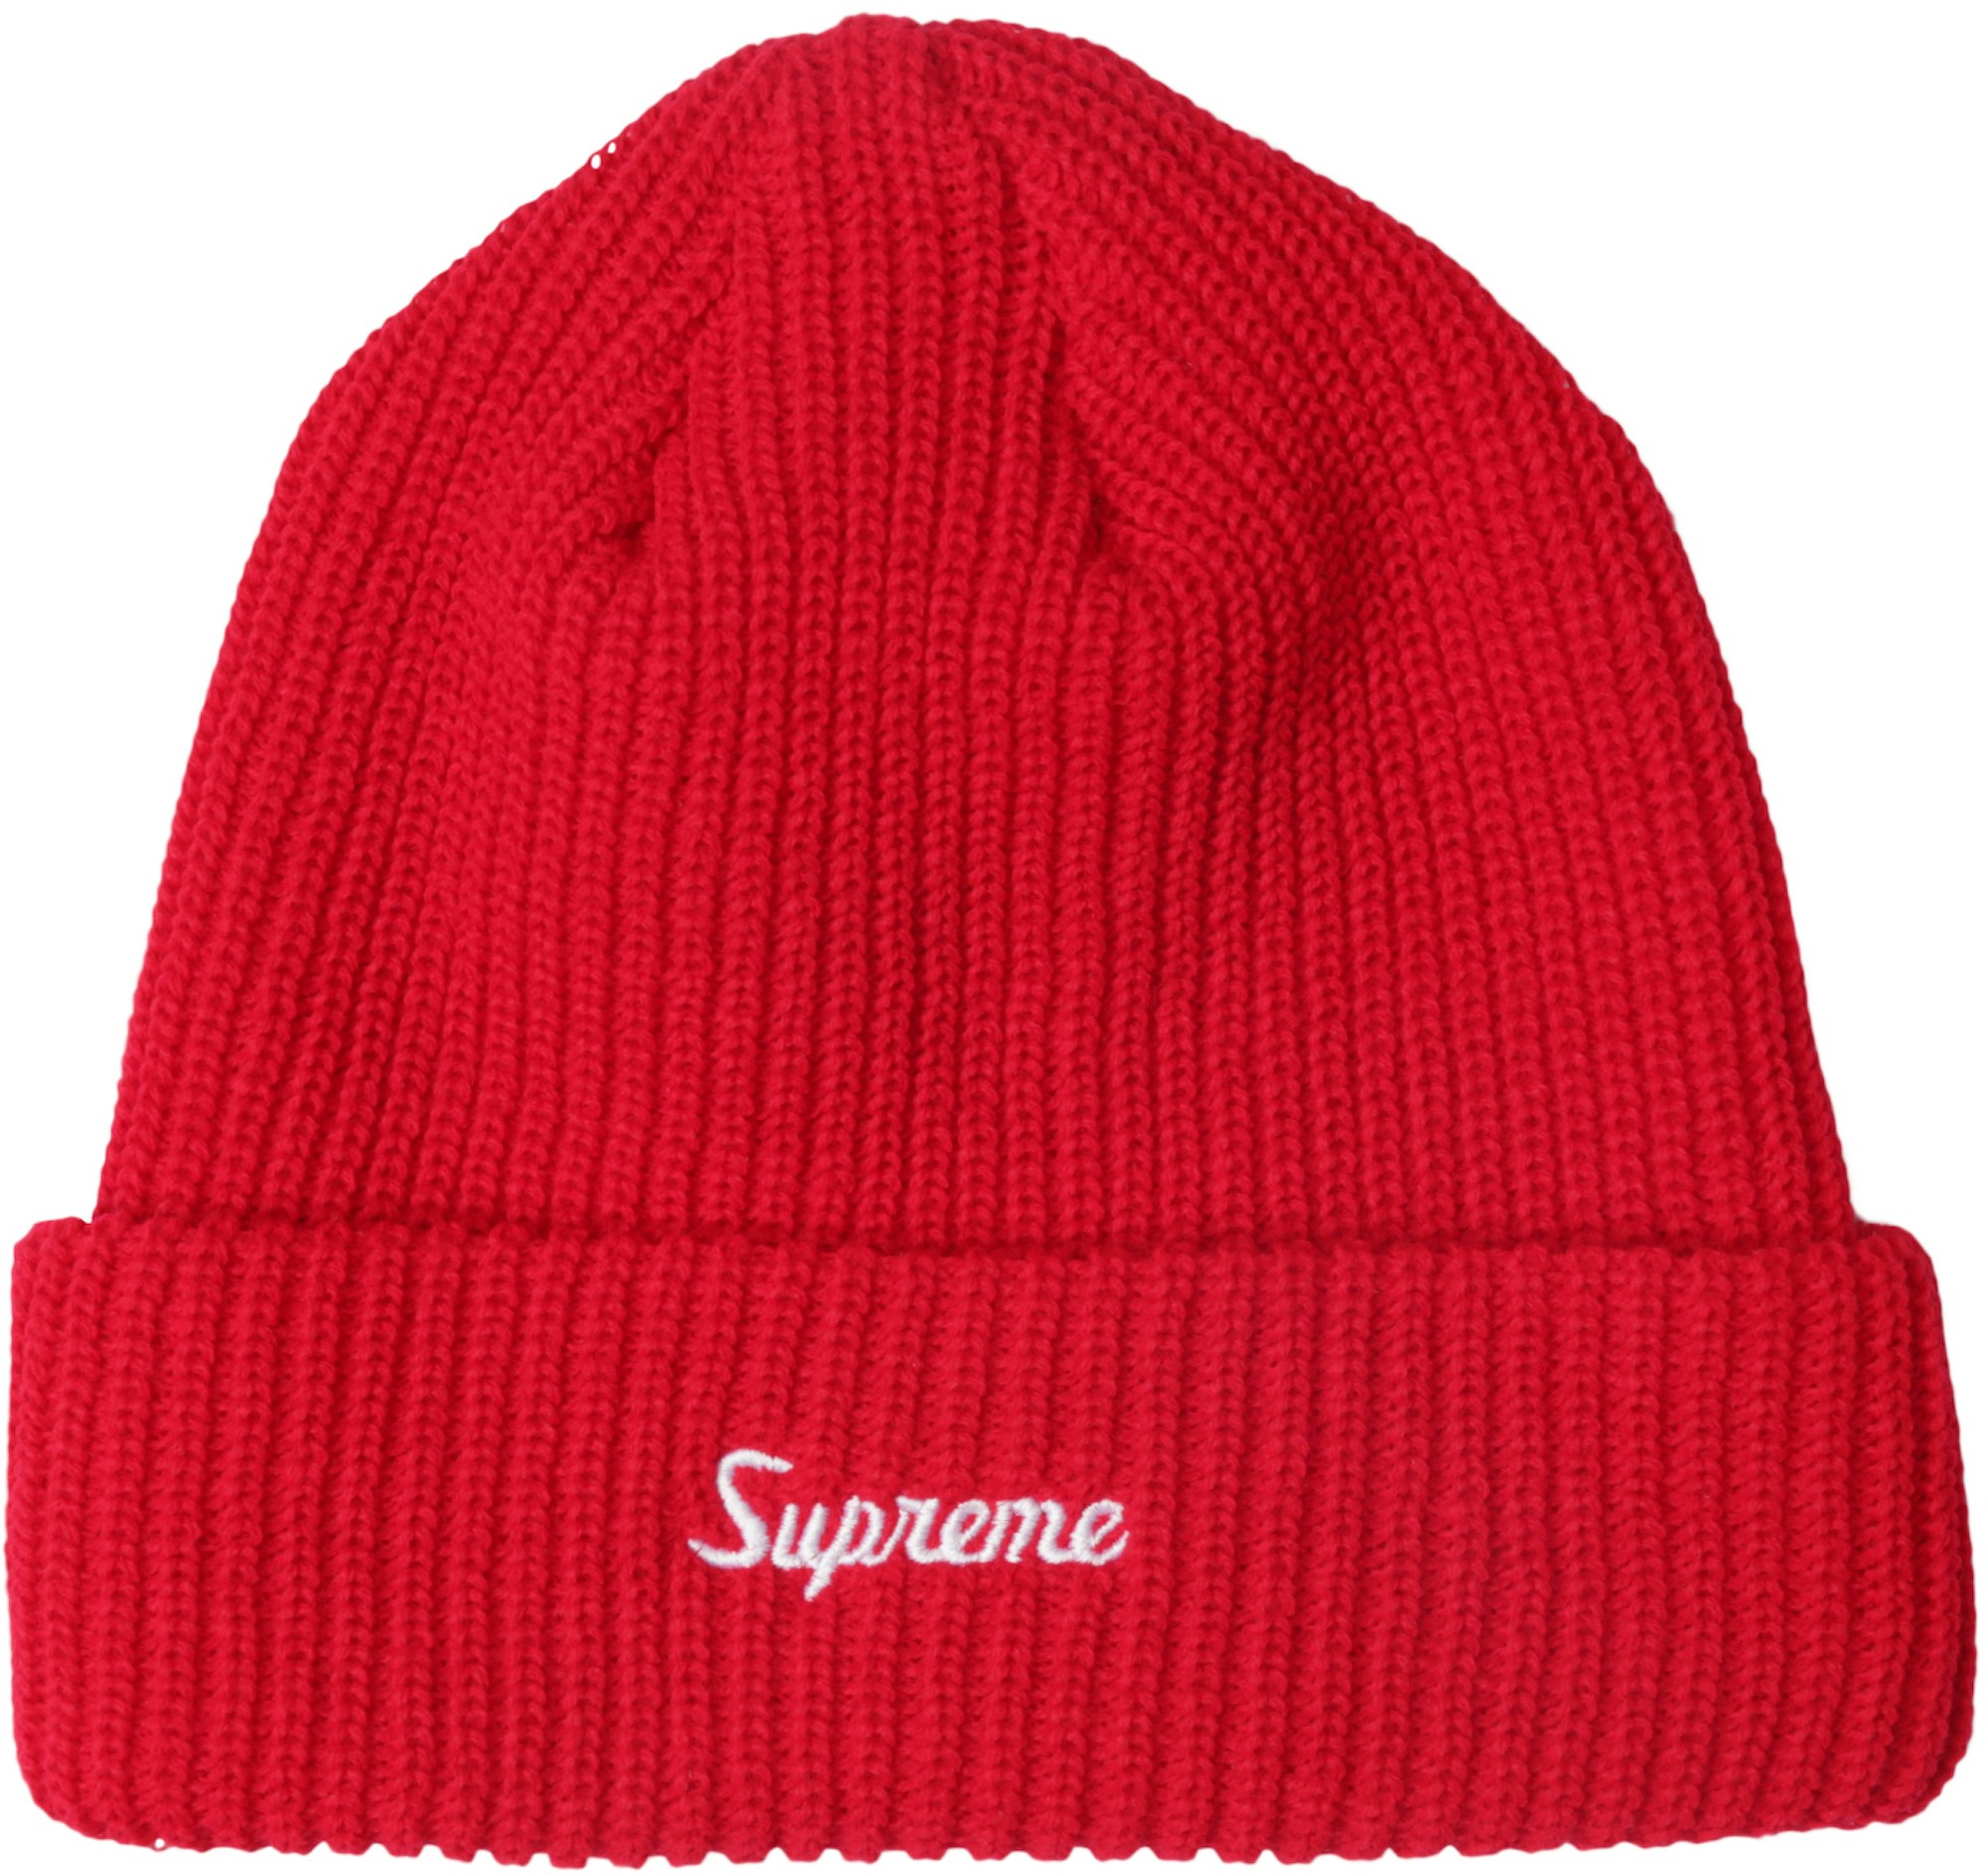 Supreme Loose Gauge Beanie (FW18) Red - FW18